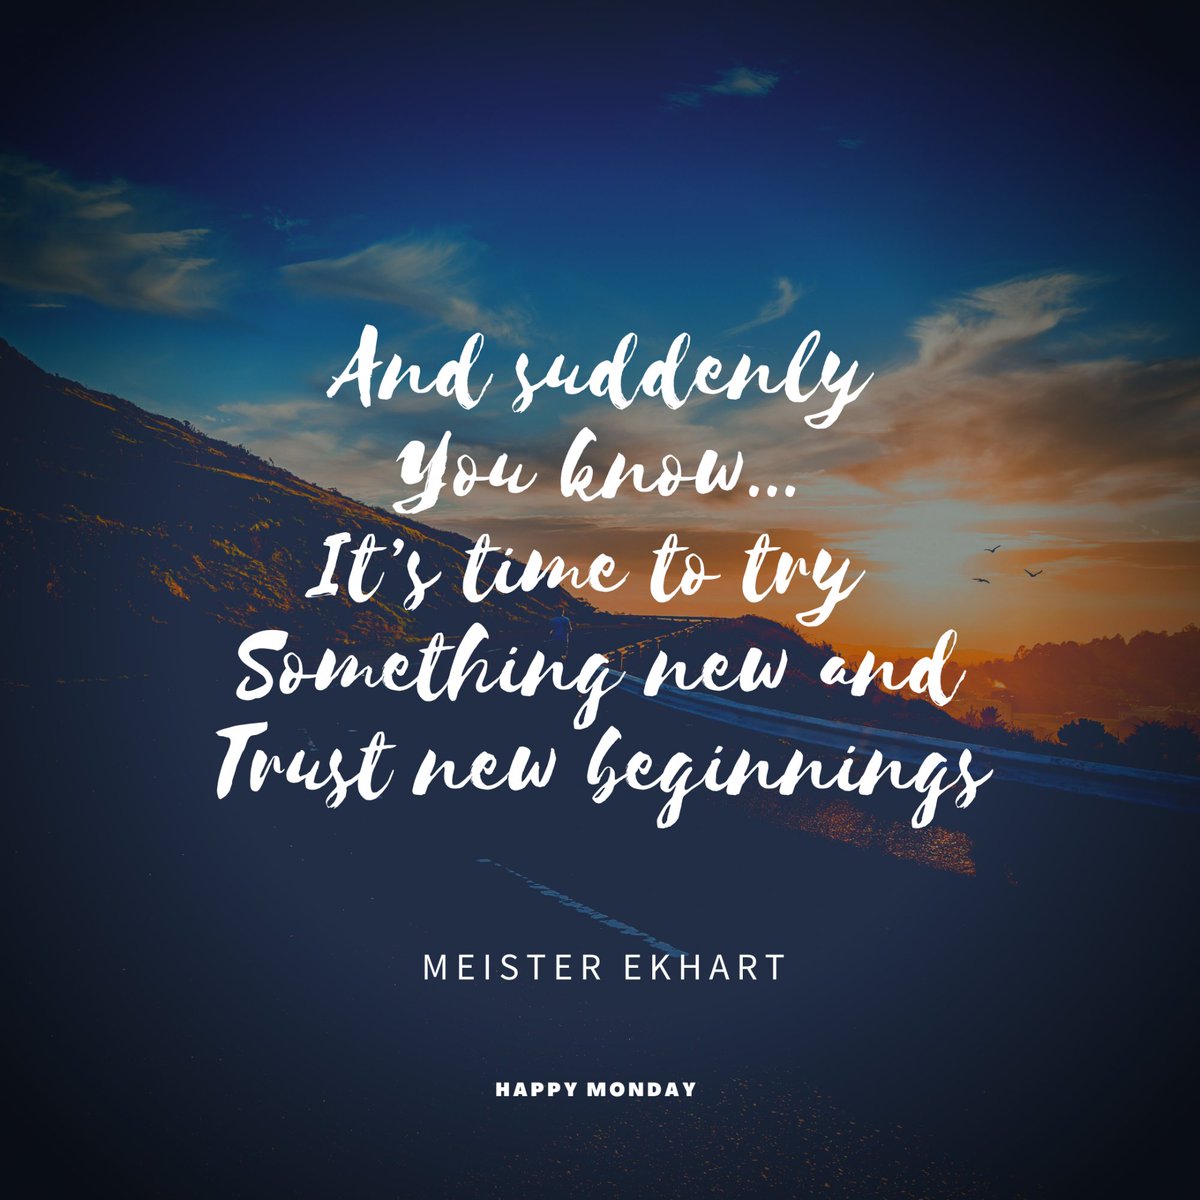 “And suddenly you know… It’s time to try something new and trust new beginnings.” - Meister Ekhart
#happymonday #dosomethingnew #newbeginnings